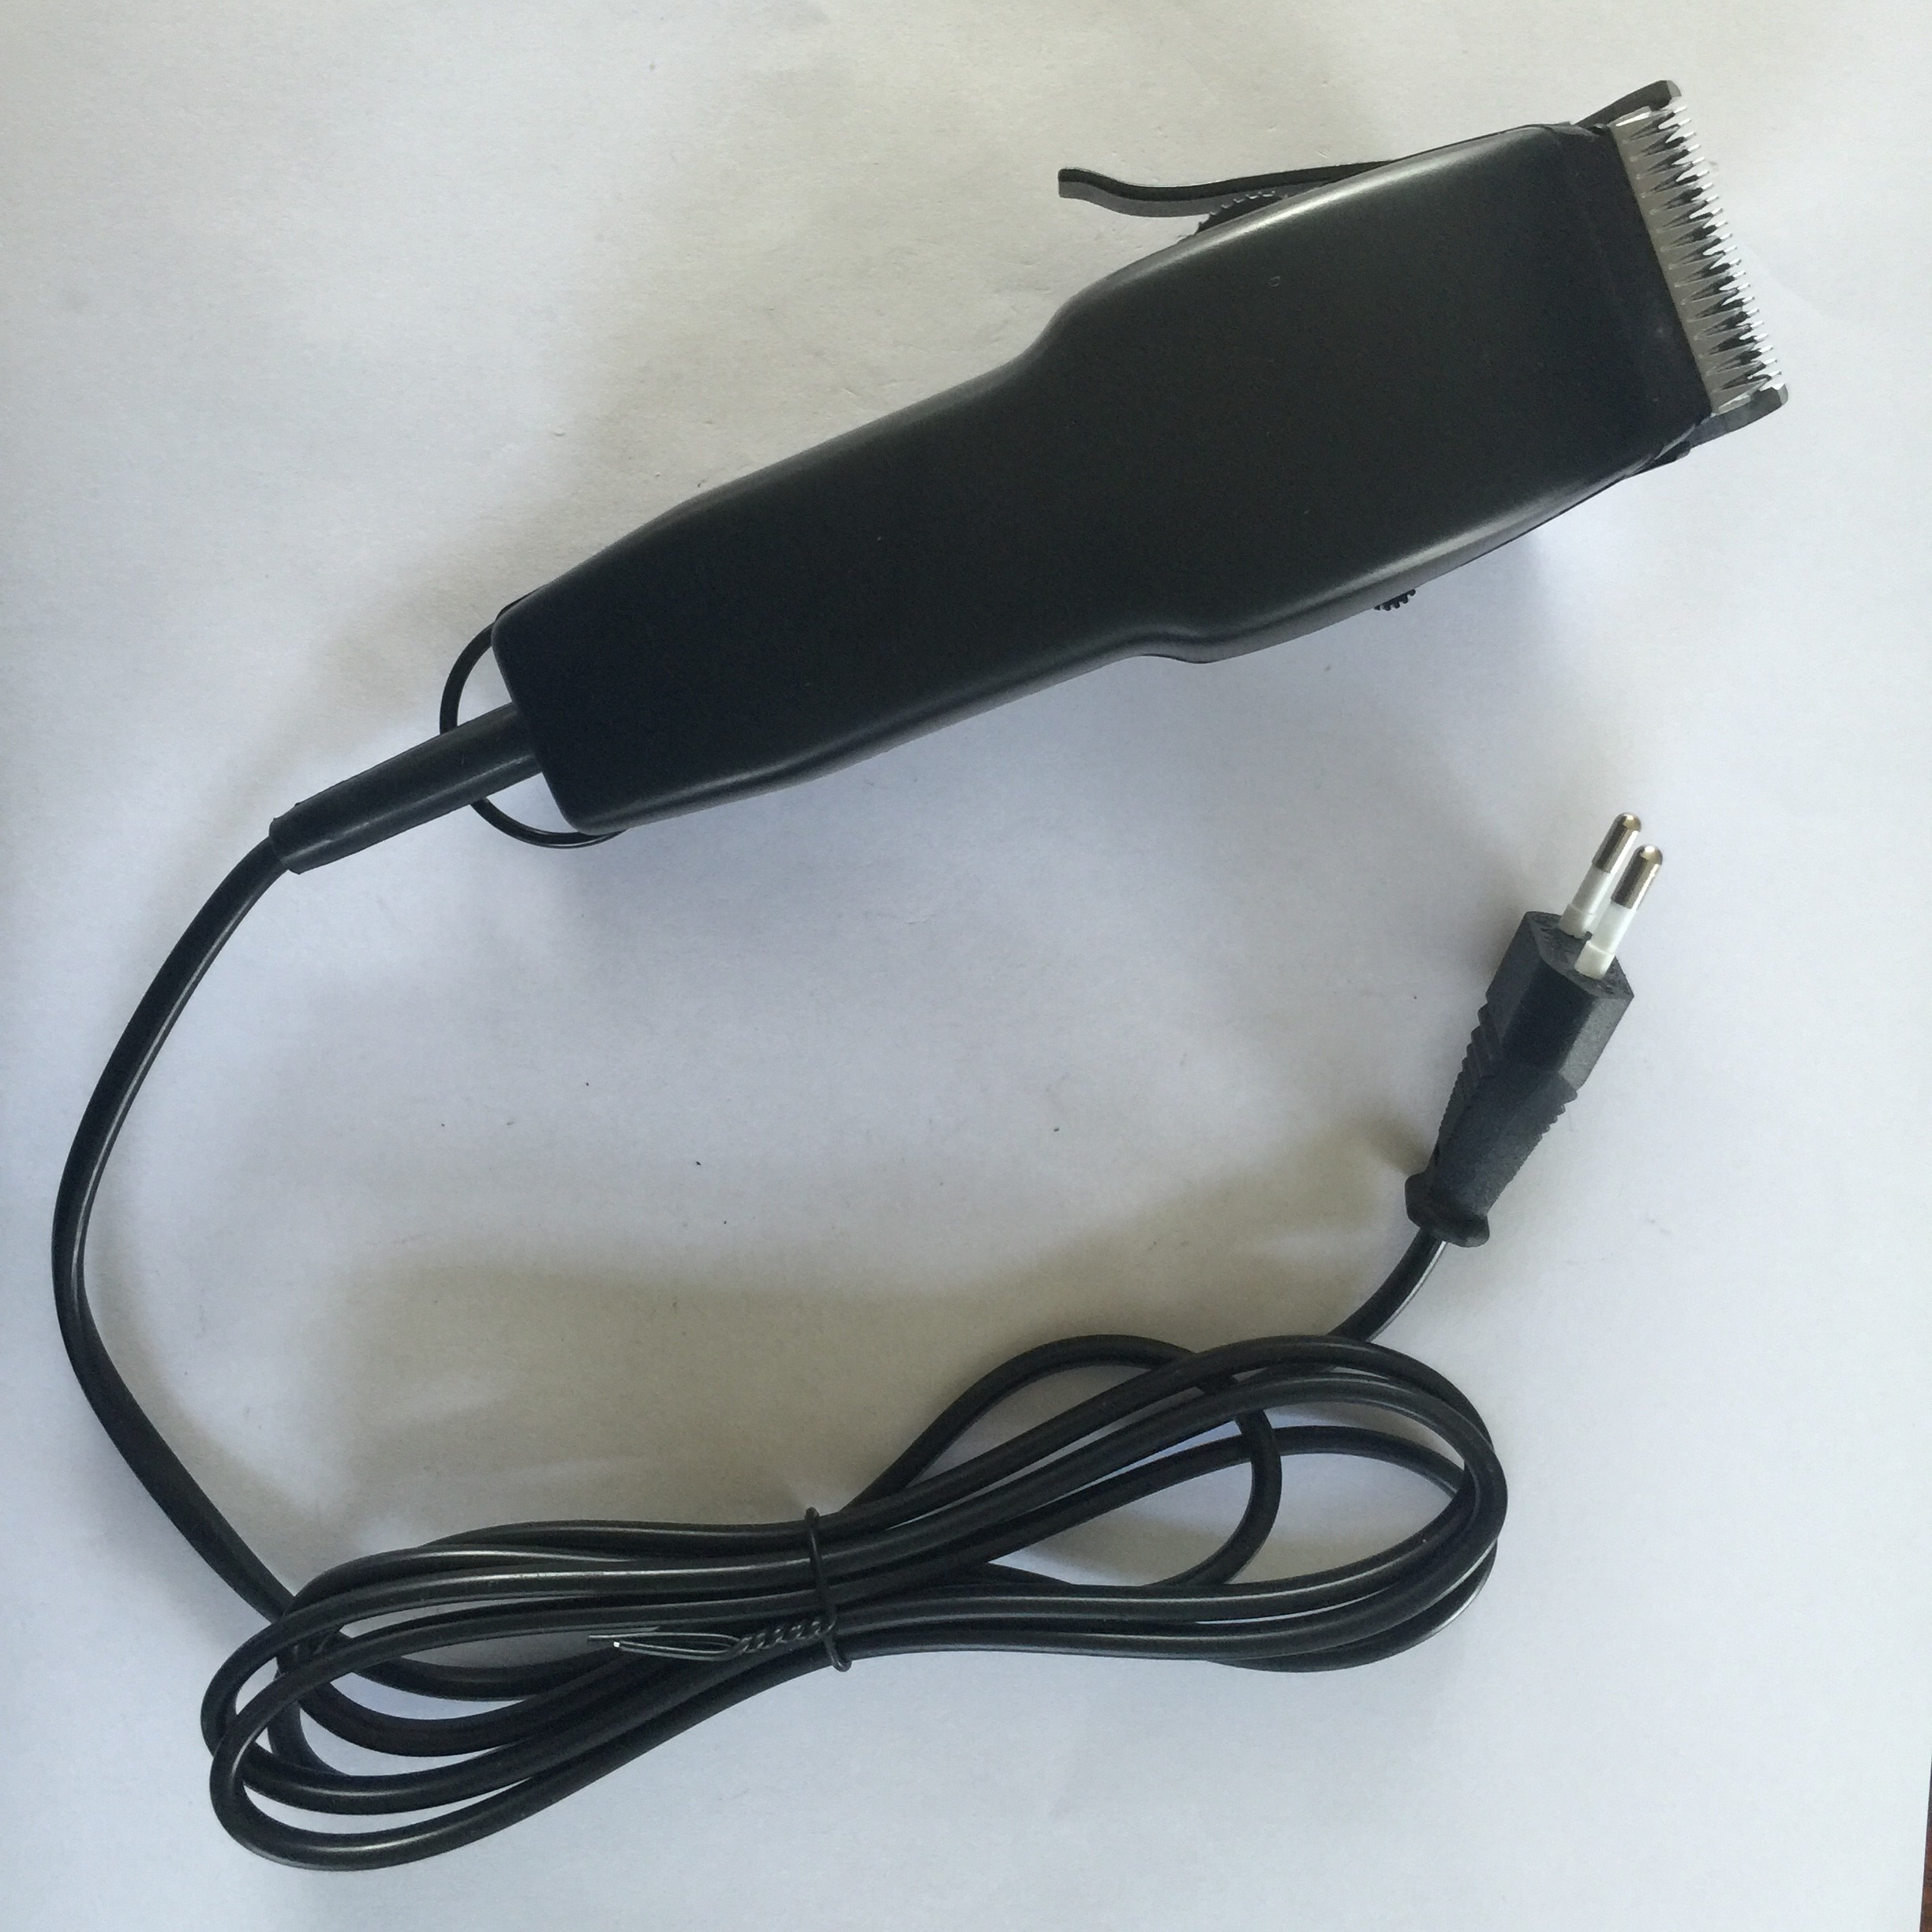 12W Strong Power Barber Hair Clipper Electromagnetic Oscillation Driven